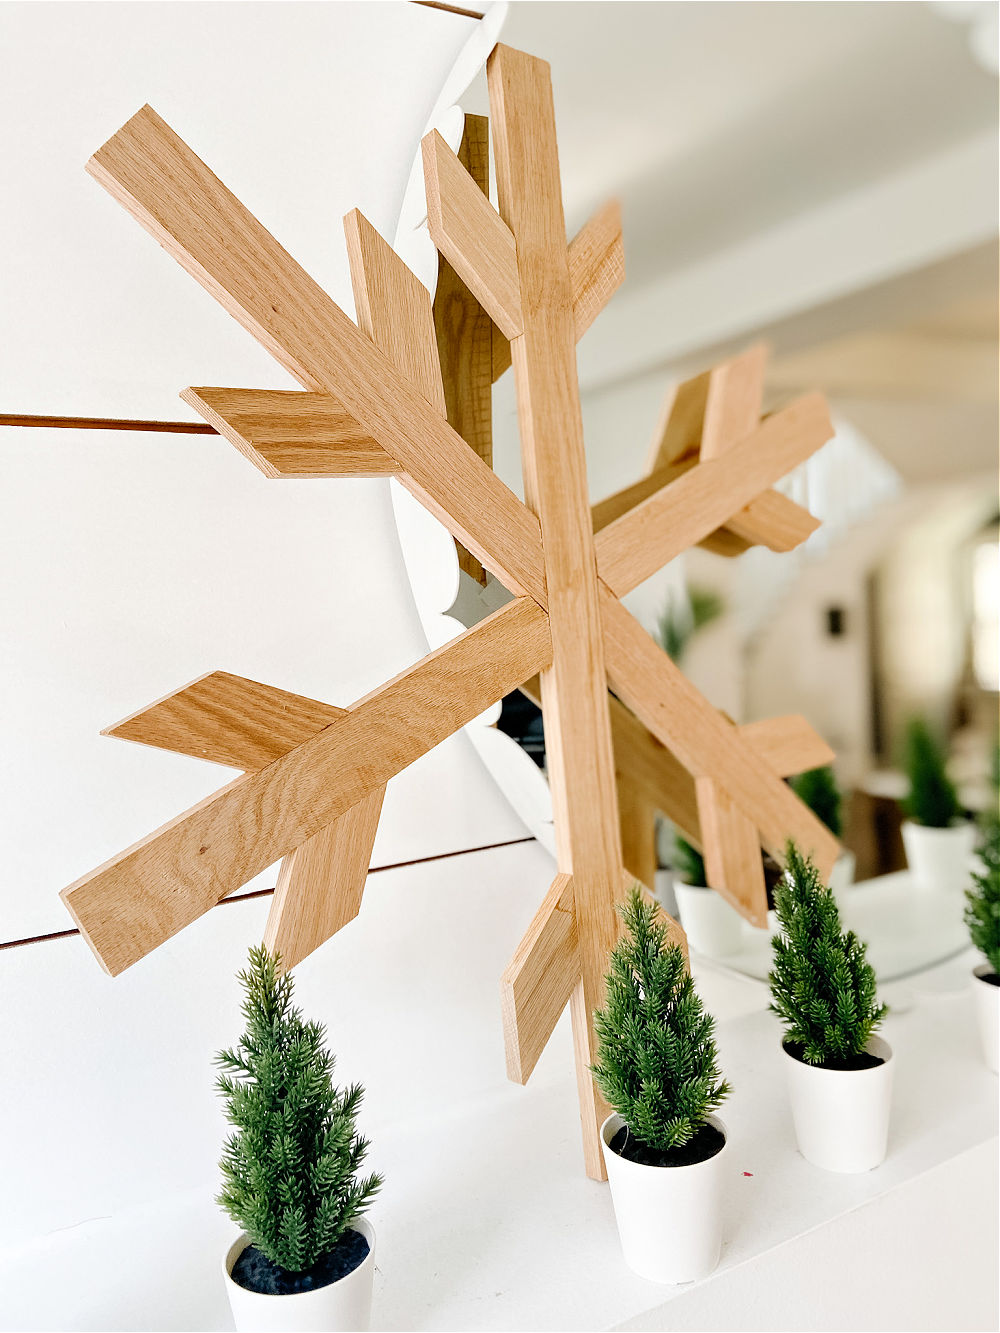 DIY Giant Farmhouse Wood Snowflake. Celebrate Winter by making a gorgeous giant wood snowflake to hang up or place on your mantel!